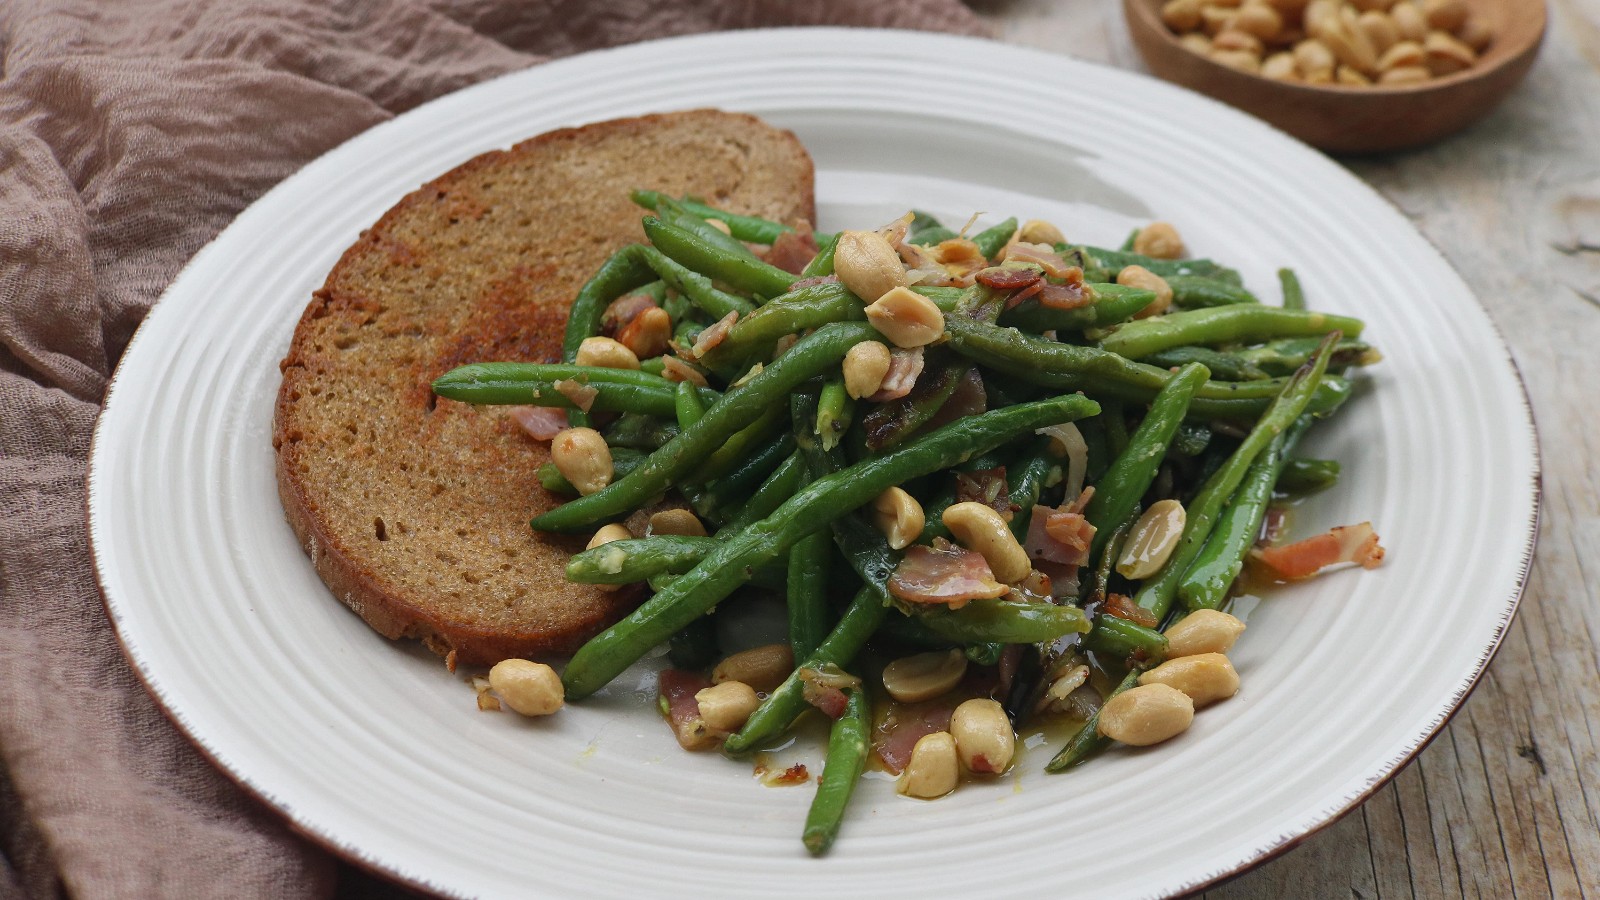 Image of Recipe-351-Green Beans with Bacon and Peanuts sauteed in Olive Oil